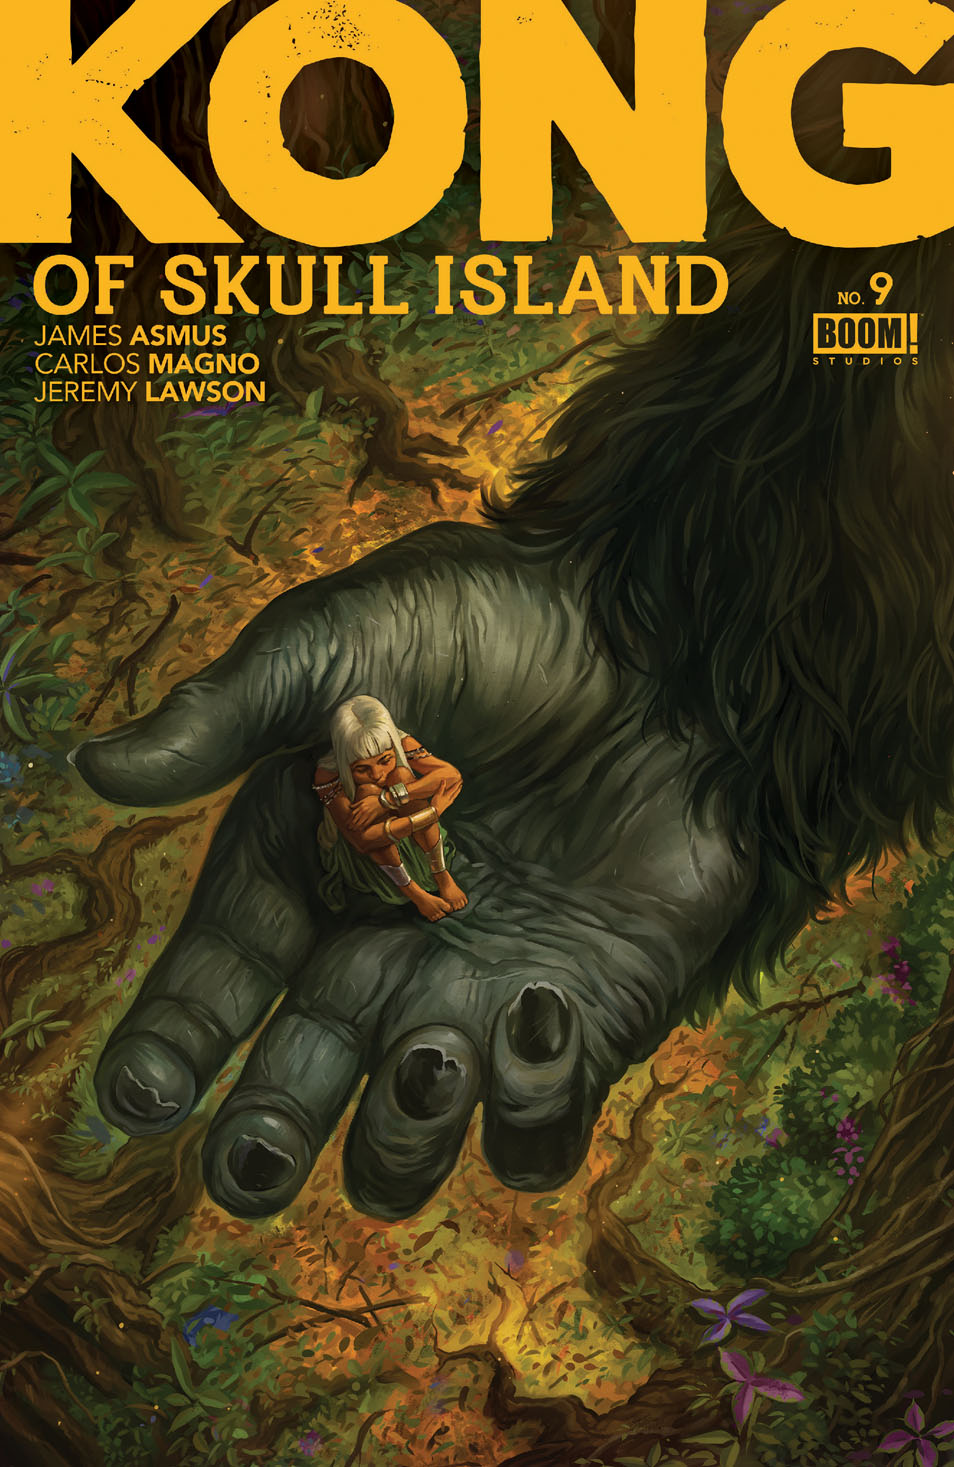 This image is the cover for the book Kong of Skull Island #9, Kong of Skull Island